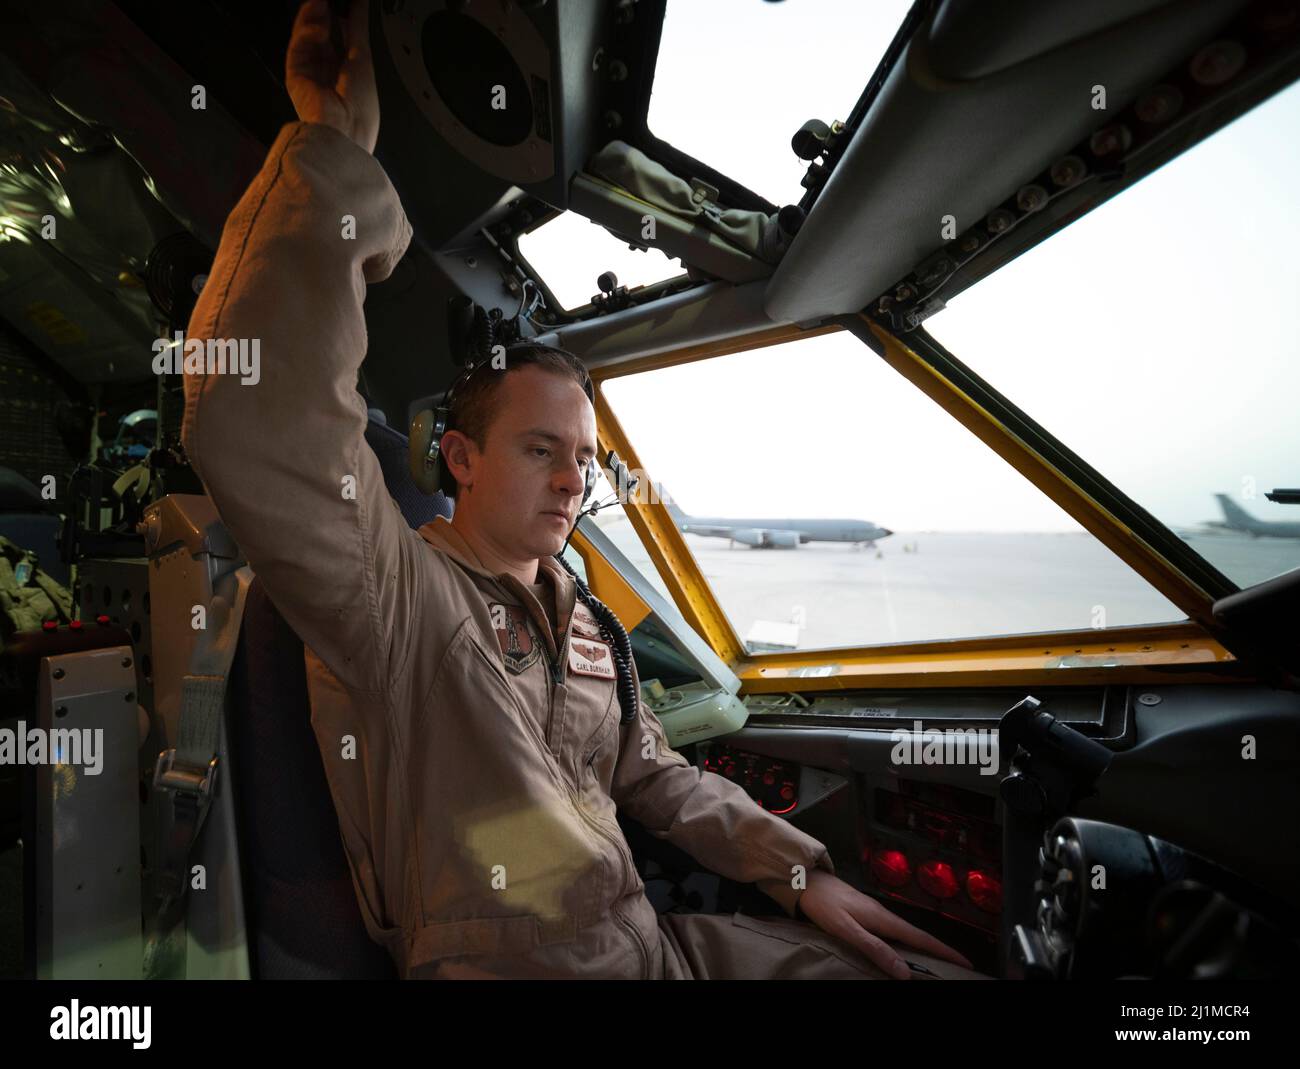 U.S. Air Force Capt. Carl Burnham, a U.S. Air Force KC-135 Stratotanker pilot assigned to the 340th Expeditionary Air Refueling Squadron, conducts pre-flight checks at Al Udeid Air Base, Qatar, March 12, 2022. The 340th EARS, deployed with Ninth Air Force (Air Forces Central), is responsible for delivering fuel to U.S. and coalition forces, enabling war-winning air power, deterrence and stability to the region. (U.S. Air Force photo by Tech. Sgt. Christopher Ruano) Stock Photo